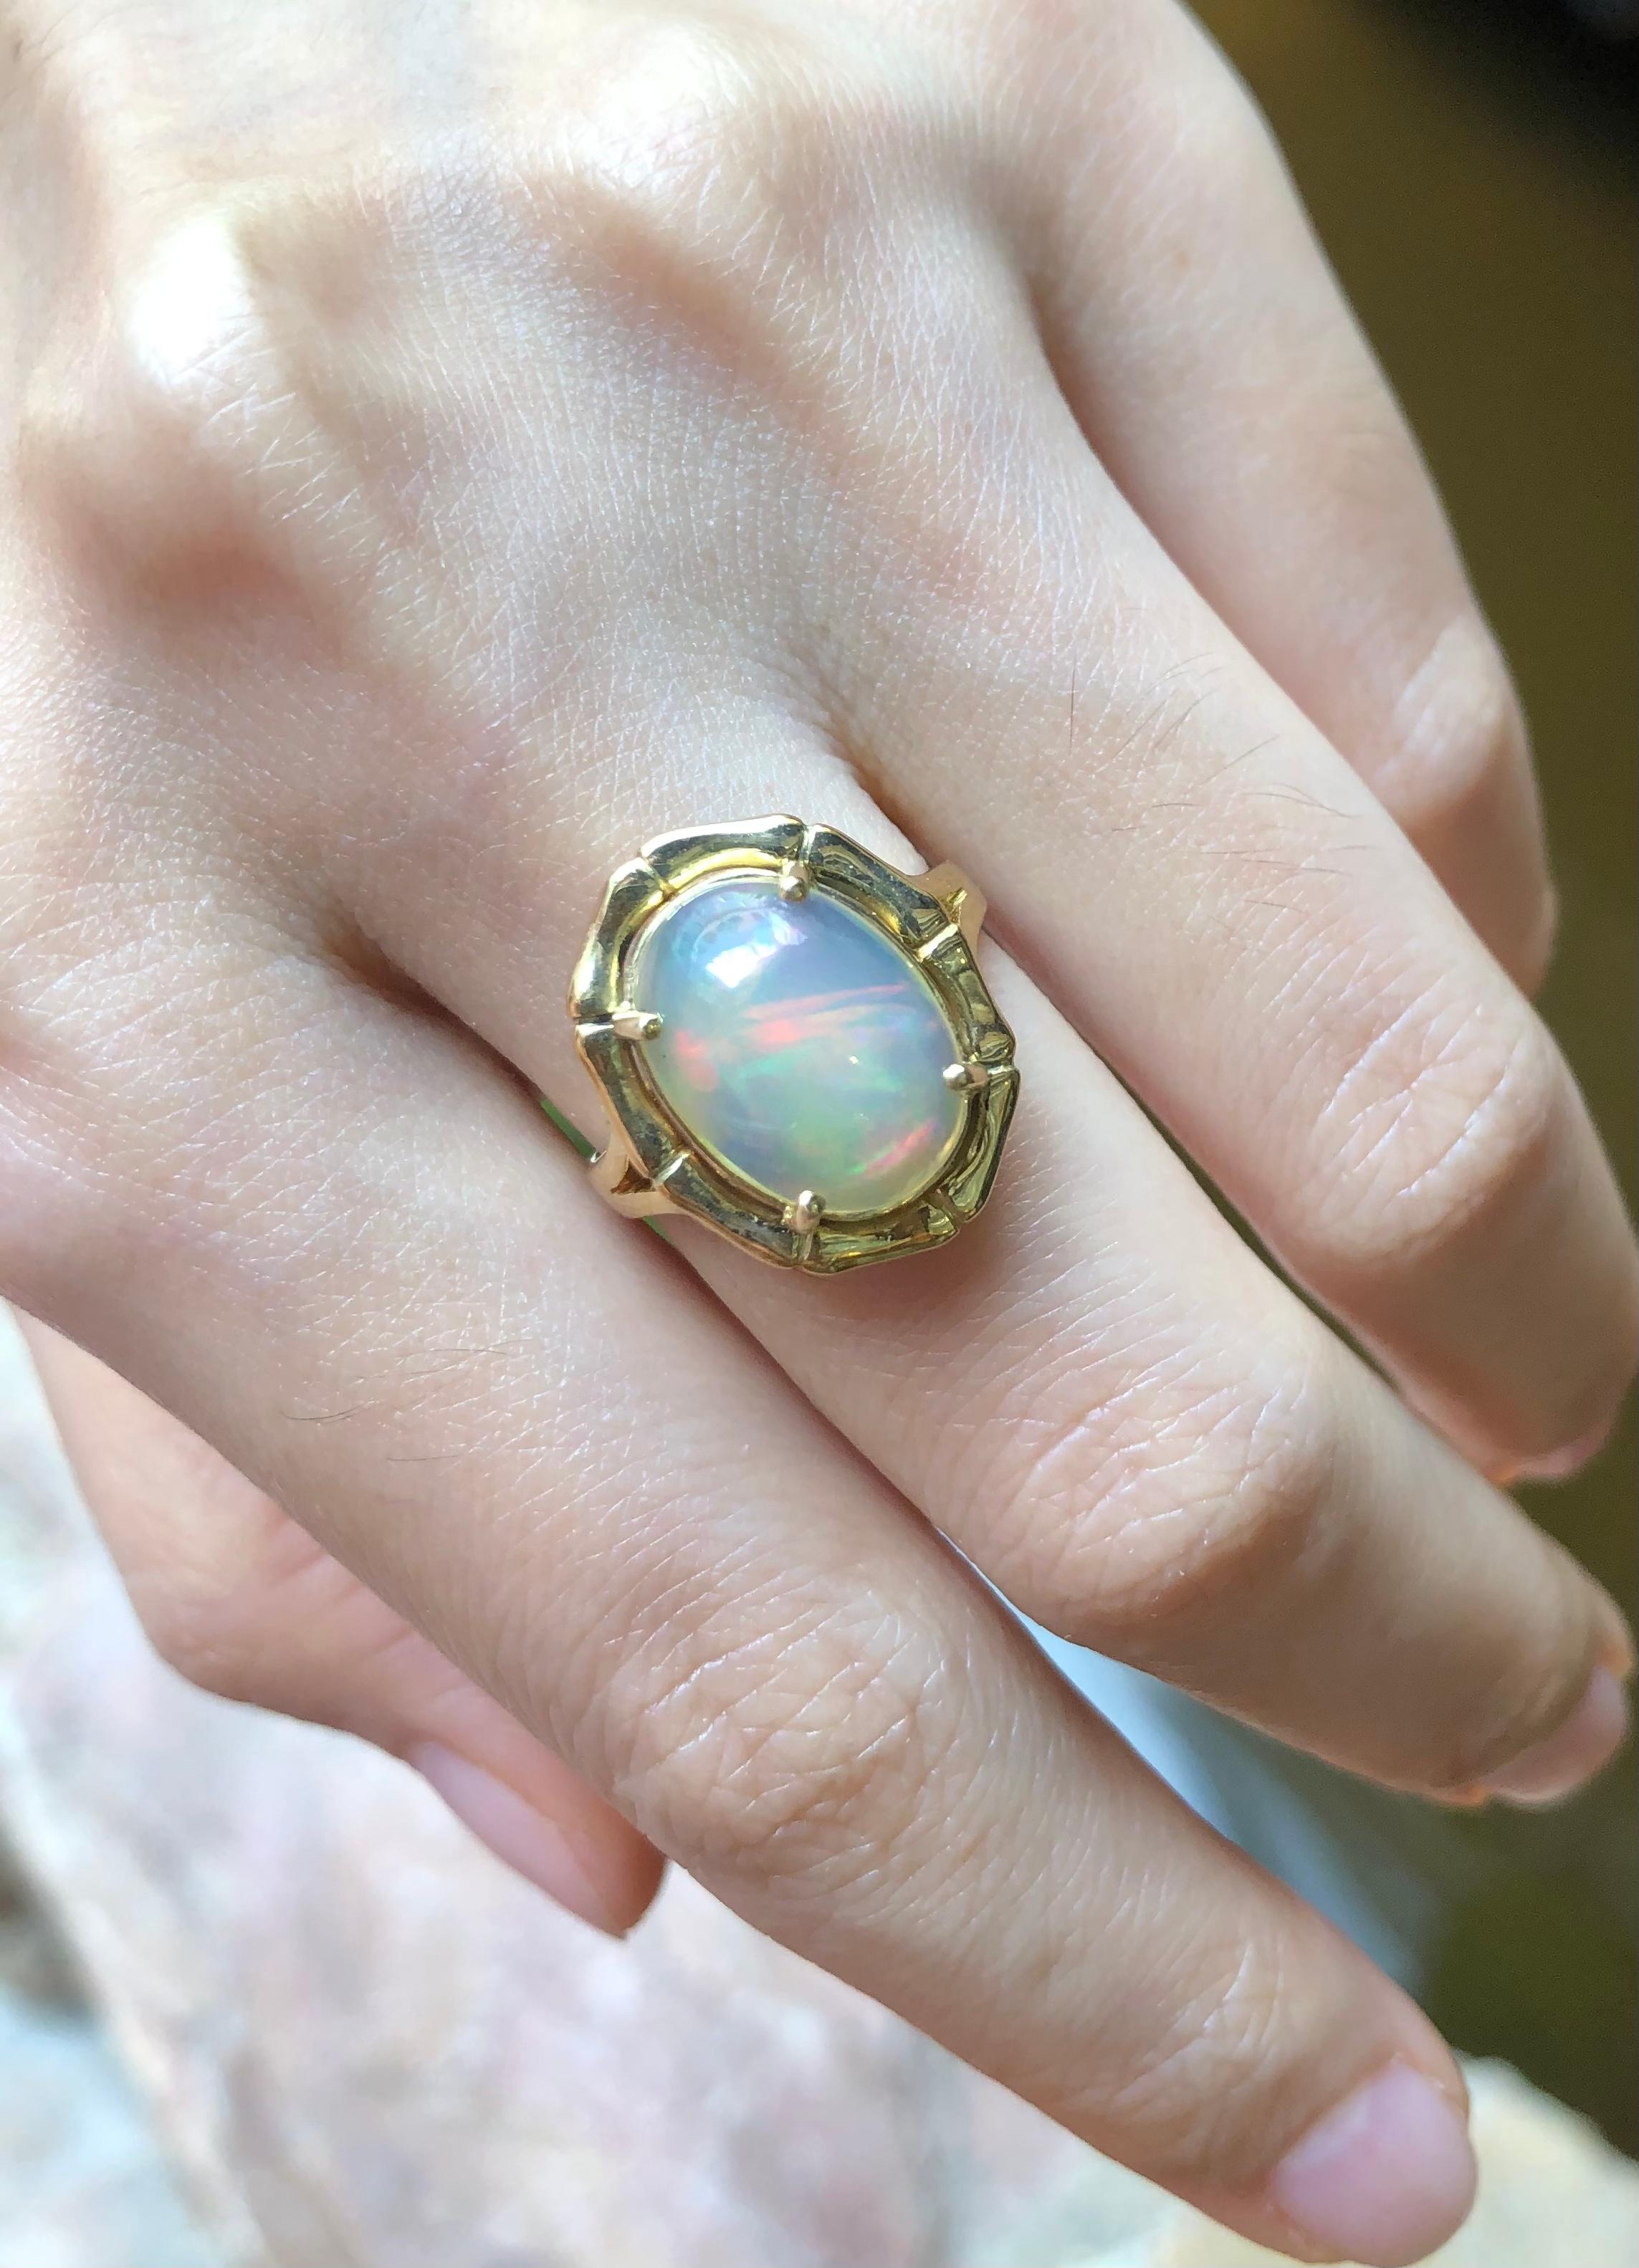 Opal 3.64 carats Ring set in 18 Karat Gold Settings

Width:  1.1 cm 
Length: 1.8 cm
Ring Size: 53
Total Weight: 5.81 grams

